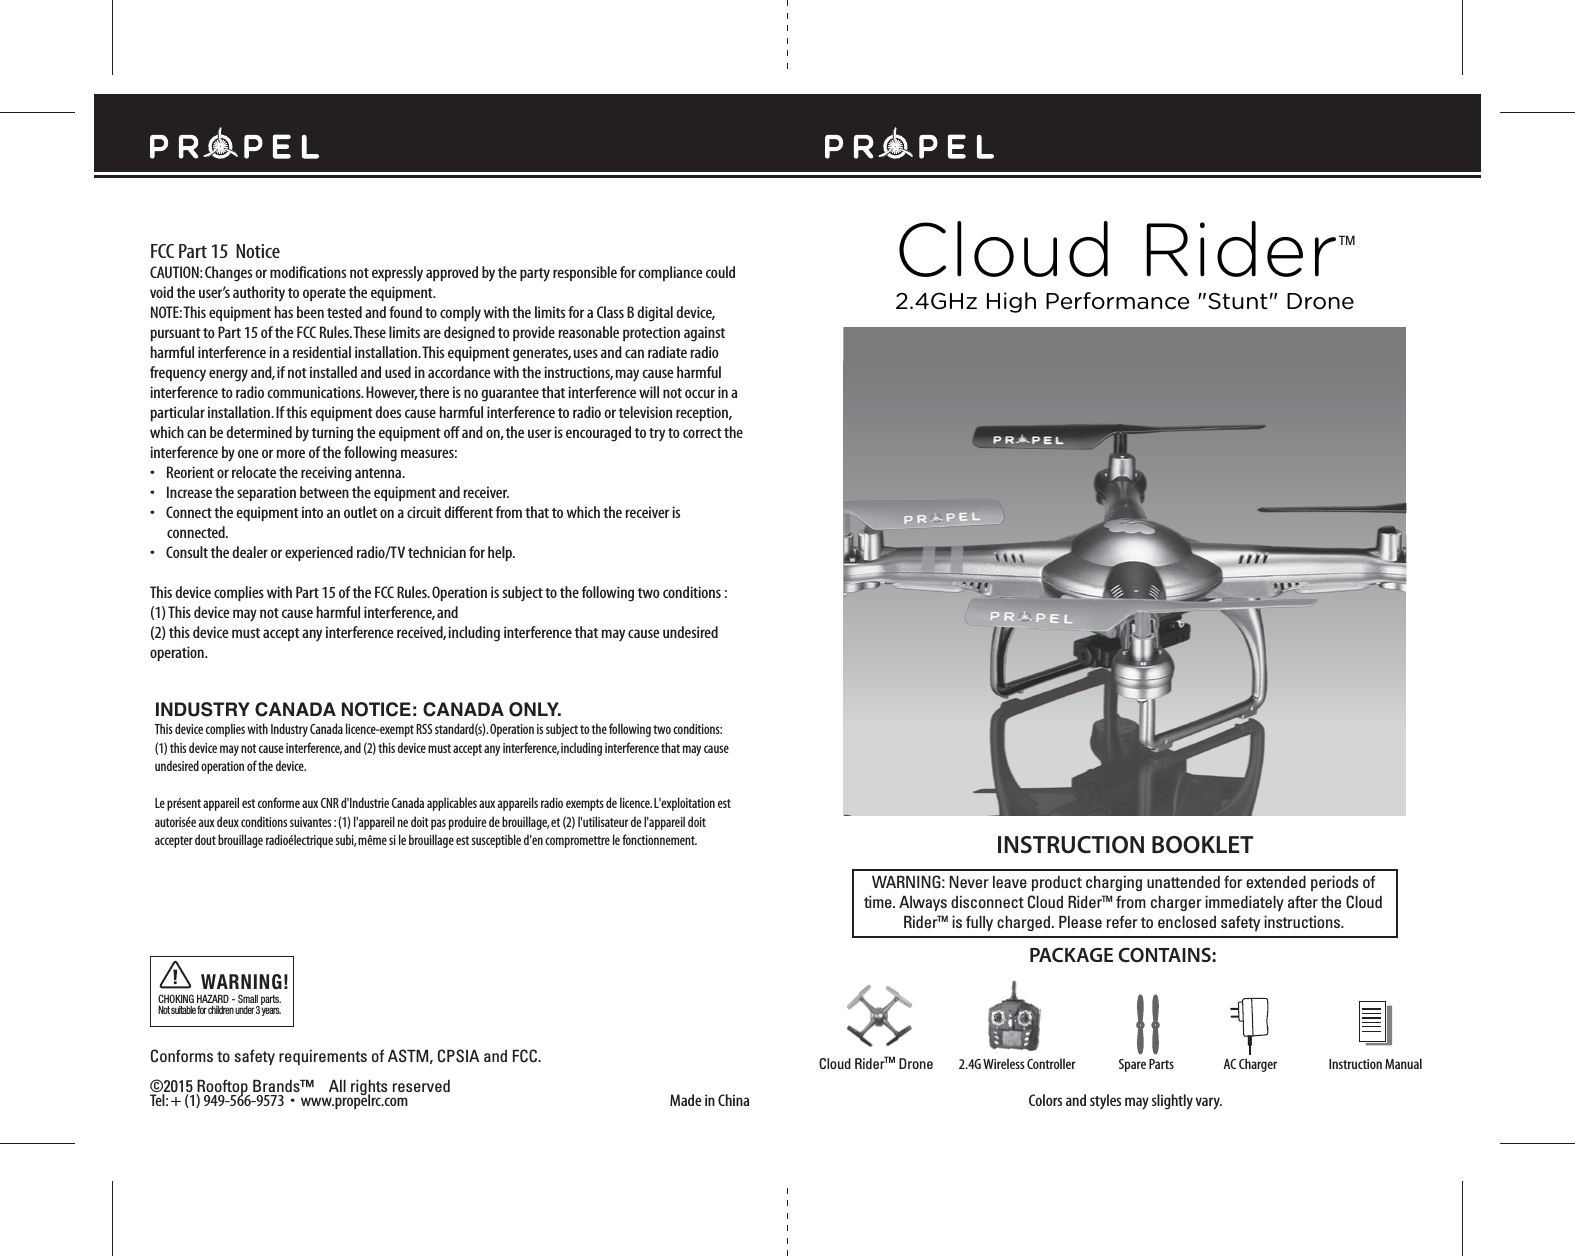 FCC Part 15  NoticeCloud RiderTMMade in ChinaConforms to safety requirements of ASTM, CPSIA and FCC. ©2015 Rooftop Brands™    All rights reserved Tel: + (1) 949-566-9573  •  www.propelrc.com CAUTION: Changes or modifications not expressly approved by the party responsible for compliance could void the user’s authority to operate the equipment.NOTE: This equipment has been tested and found to comply with the limits for a Class B digital device, pursuant to Part 15 of the FCC Rules. These limits are designed to provide reasonable protection against harmful interference in a residential installation. This equipment generates, uses and can radiate radio frequency energy and, if not installed and used in accordance with the instructions, may cause harmful interference to radio communications. However, there is no guarantee that interference will not occur in a particular installation. If this equipment does cause harmful interference to radio or television reception, which can be determined by turning the equipment off and on, the user is encouraged to try to correct the interference by one or more of the following measures:•    Reorient or relocate the receiving antenna.•    Increase the separation between the equipment and receiver.•    Connect the equipment into an outlet on a circuit different from that to which the receiver is       connected.•    Consult the dealer or experienced radio/TV technician for help.This device complies with Part 15 of the FCC Rules. Operation is subject to the following two conditions : (1) This device may not cause harmful interference, and(2) this device must accept any interference received, including interference that may cause undesired operation.CHOKING HAZARD - Small parts. Not suitable for children under 3 years.WARNING!WARNING: Never leave product charging unattended for extended periods of time. Always disconnect Cloud RiderTM from charger immediately after the Cloud RiderTM is fully charged. Please refer to enclosed safety instructions.INSTRUCTION BOOKLETColors and styles may slightly vary.PACKAGE CONTAINS:2.4G Wireless Controller Instruction ManualSpare Parts AC ChargerCloud RiderTM Drone2.4GHz High Performance &quot;Stunt&quot; DroneINDUSTRY CANADA NOTICE: CANADA ONLY.This device complies with Industry Canada licence-exempt RSS standard(s). Operation is subject to the following two conditions: (1) this device may not cause interference, and (2) this device must accept any interference, including interference that may cause undesired operation of the device.Le présent appareil est conforme aux CNR d&apos;Industrie Canada applicables aux appareils radio exempts de licence. L&apos;exploitation est autorisée aux deux conditions suivantes : (1) l&apos;appareil ne doit pas produire de brouillage, et (2) l&apos;utilisateur de l&apos;appareil doit accepter dout brouillage radioélectrique subi, même si le brouillage est susceptible d&apos;en compromettre le fonctionnement.